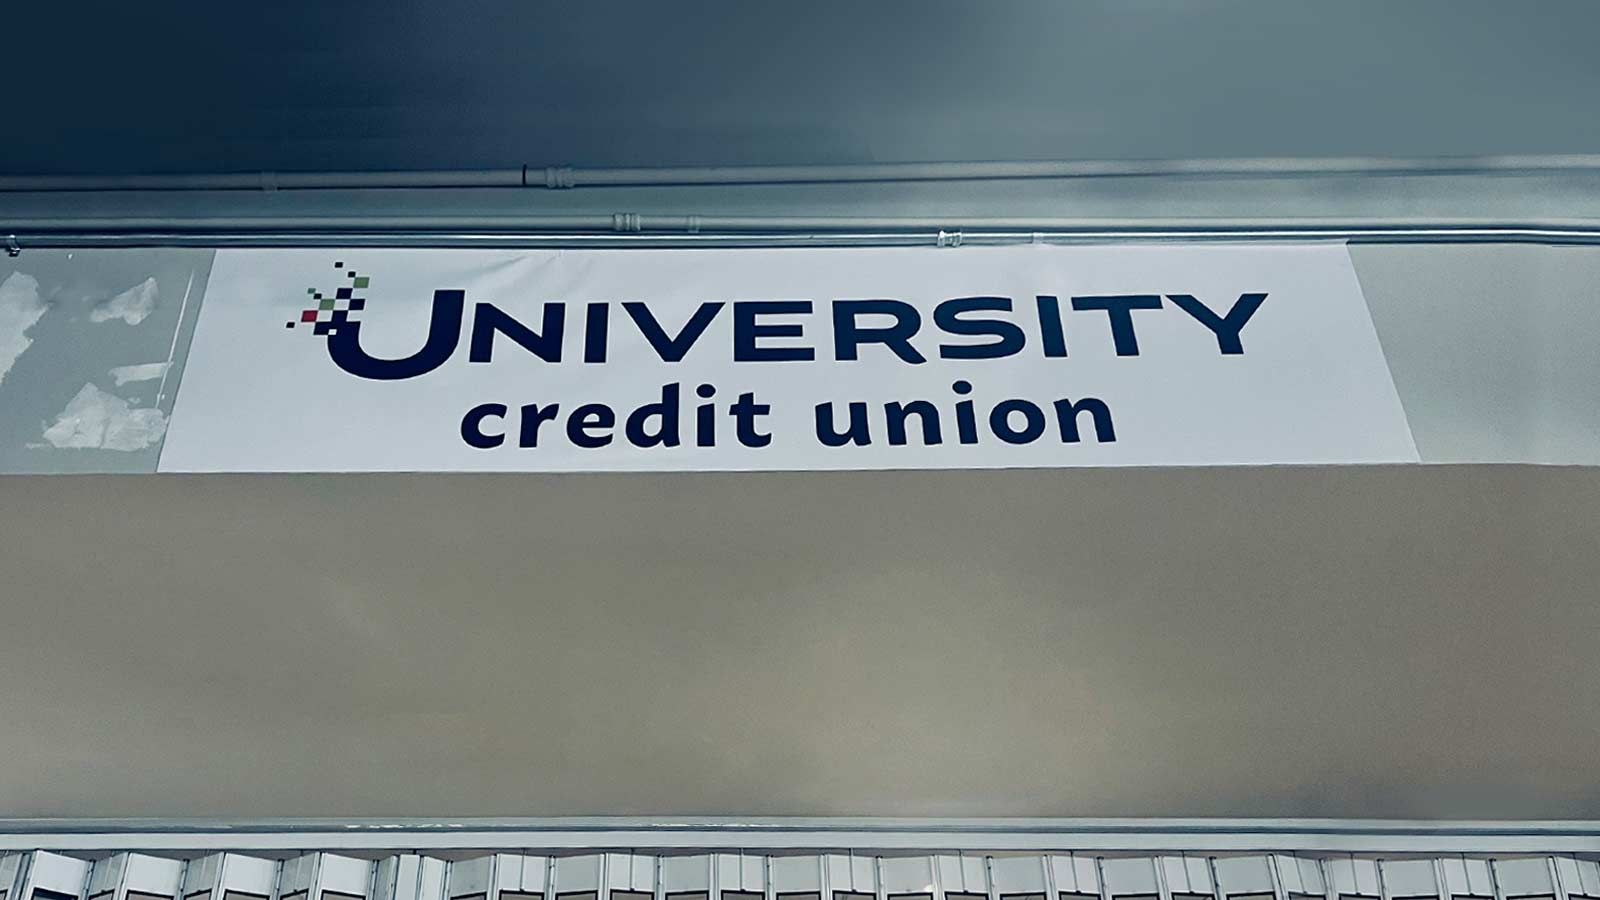 University Credit Union banner set up on the wall